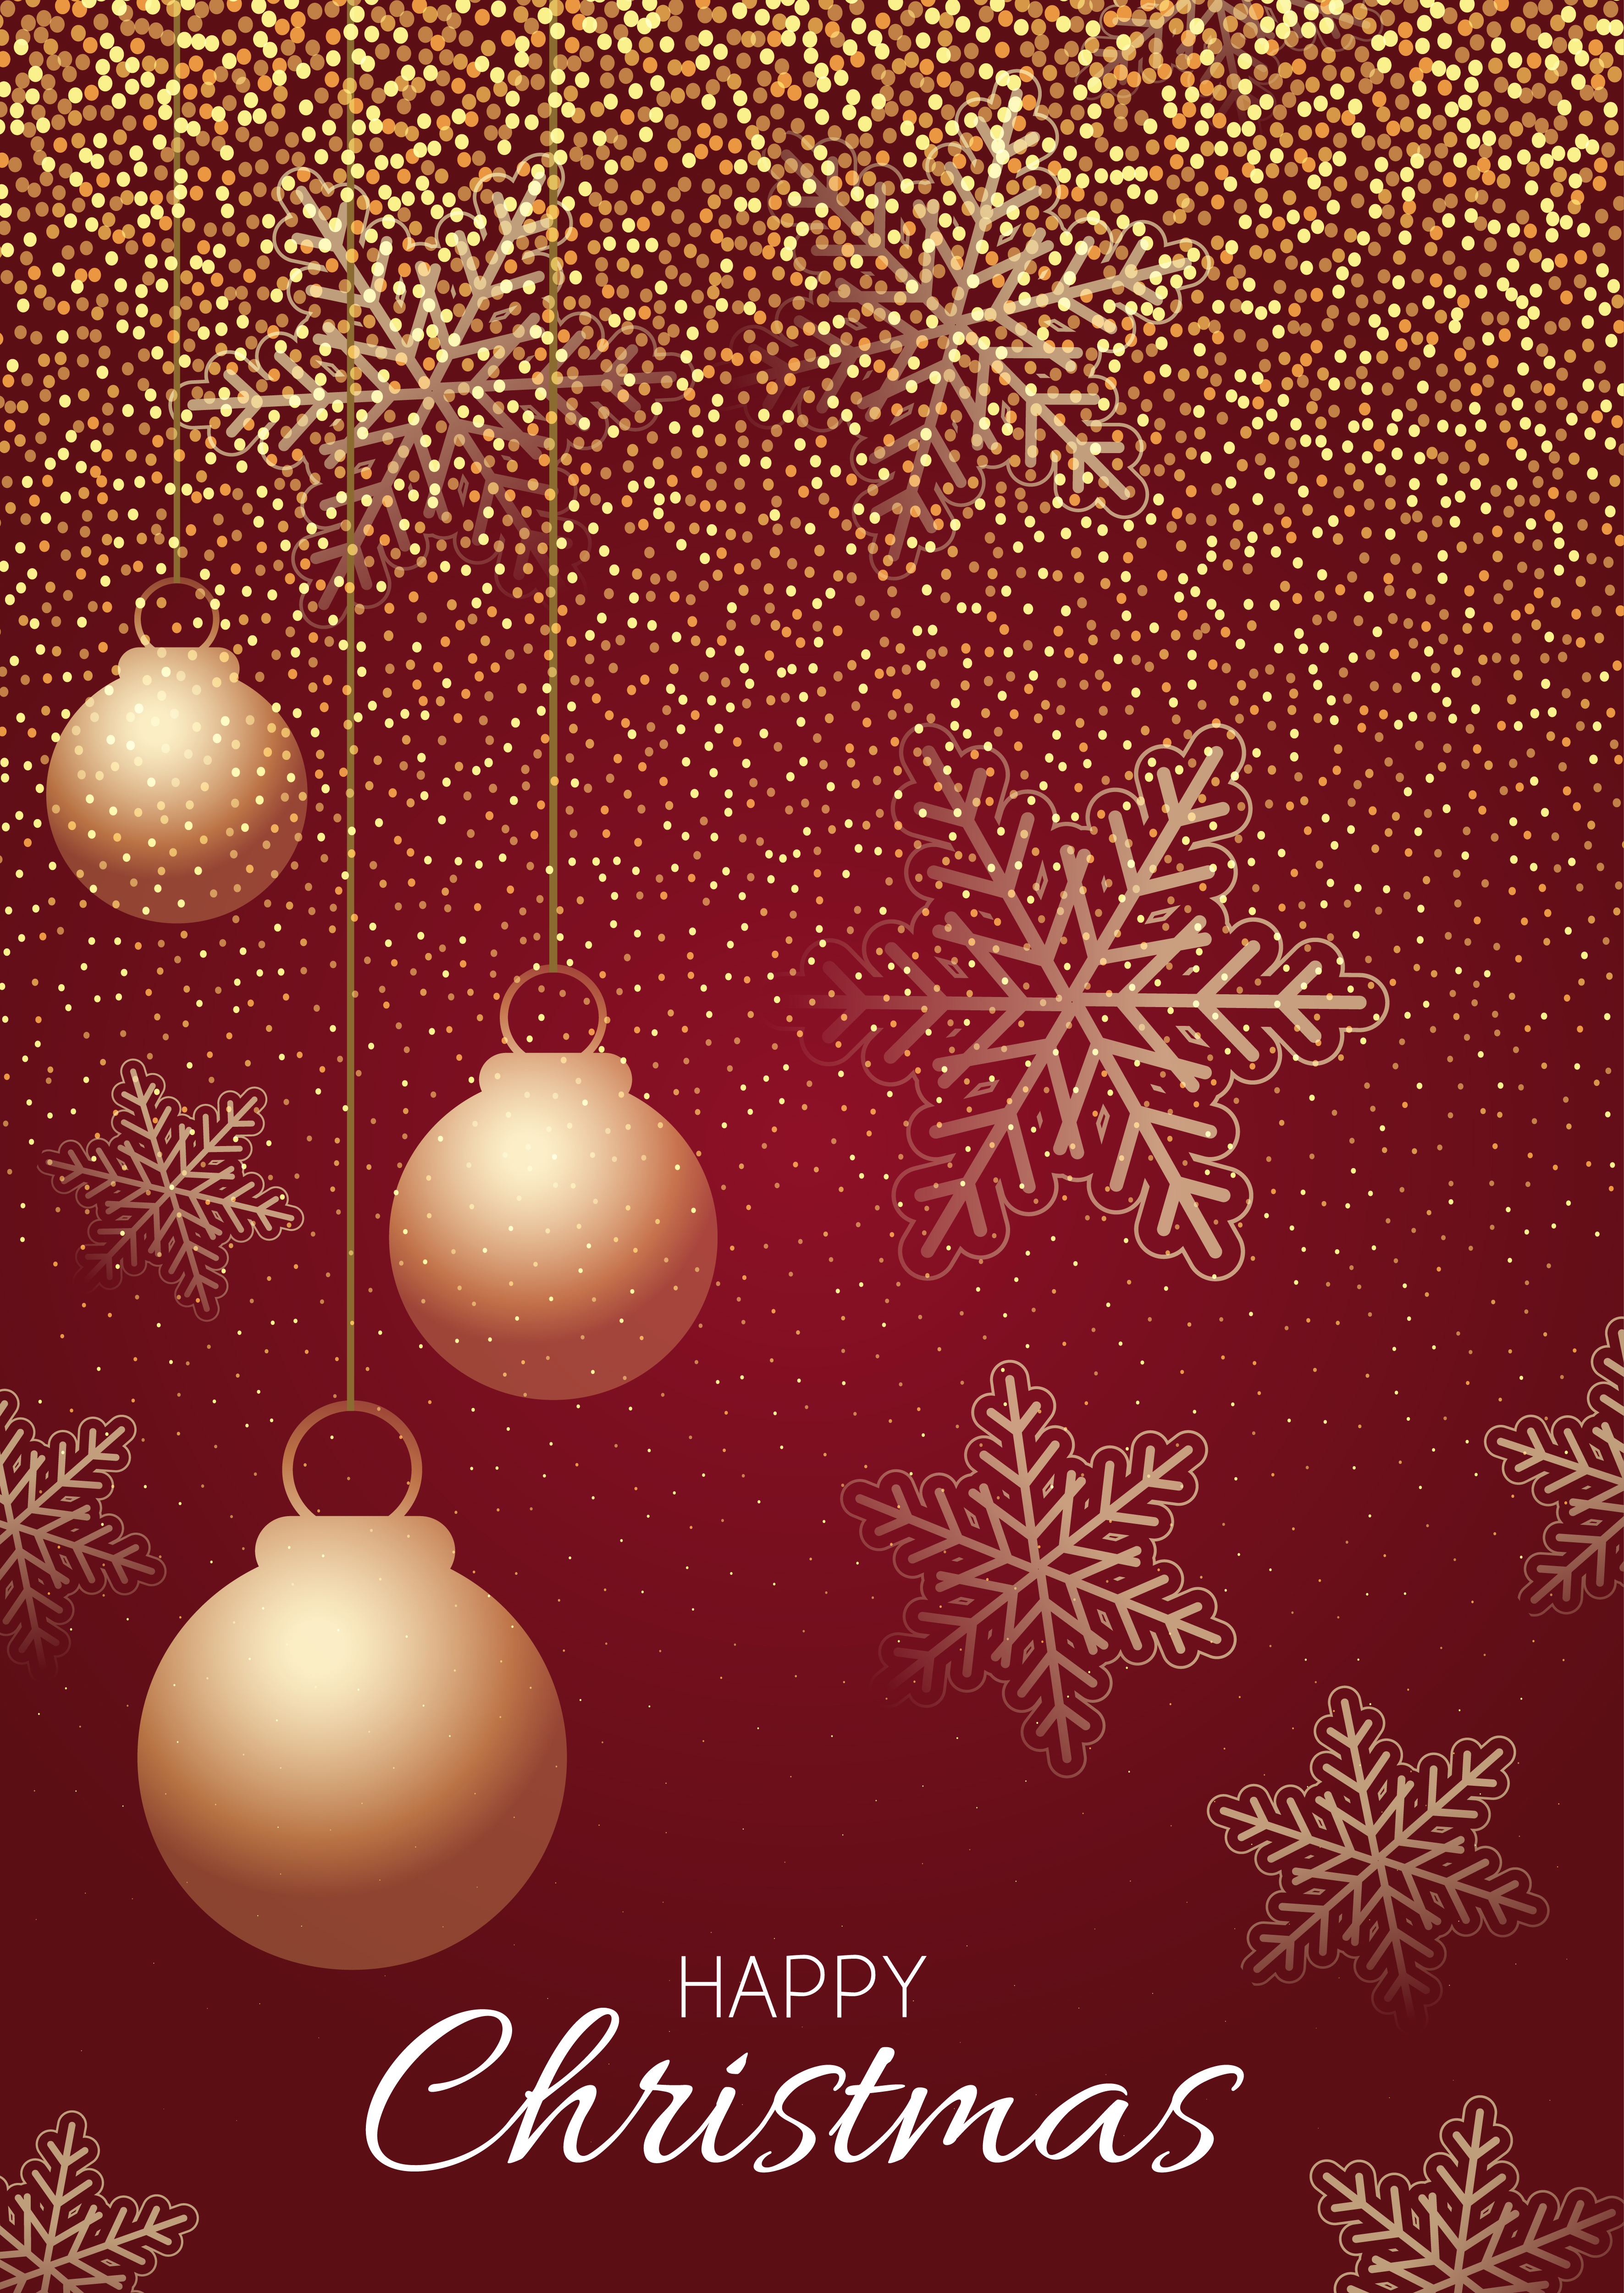 Decorative red and gold Christmas background